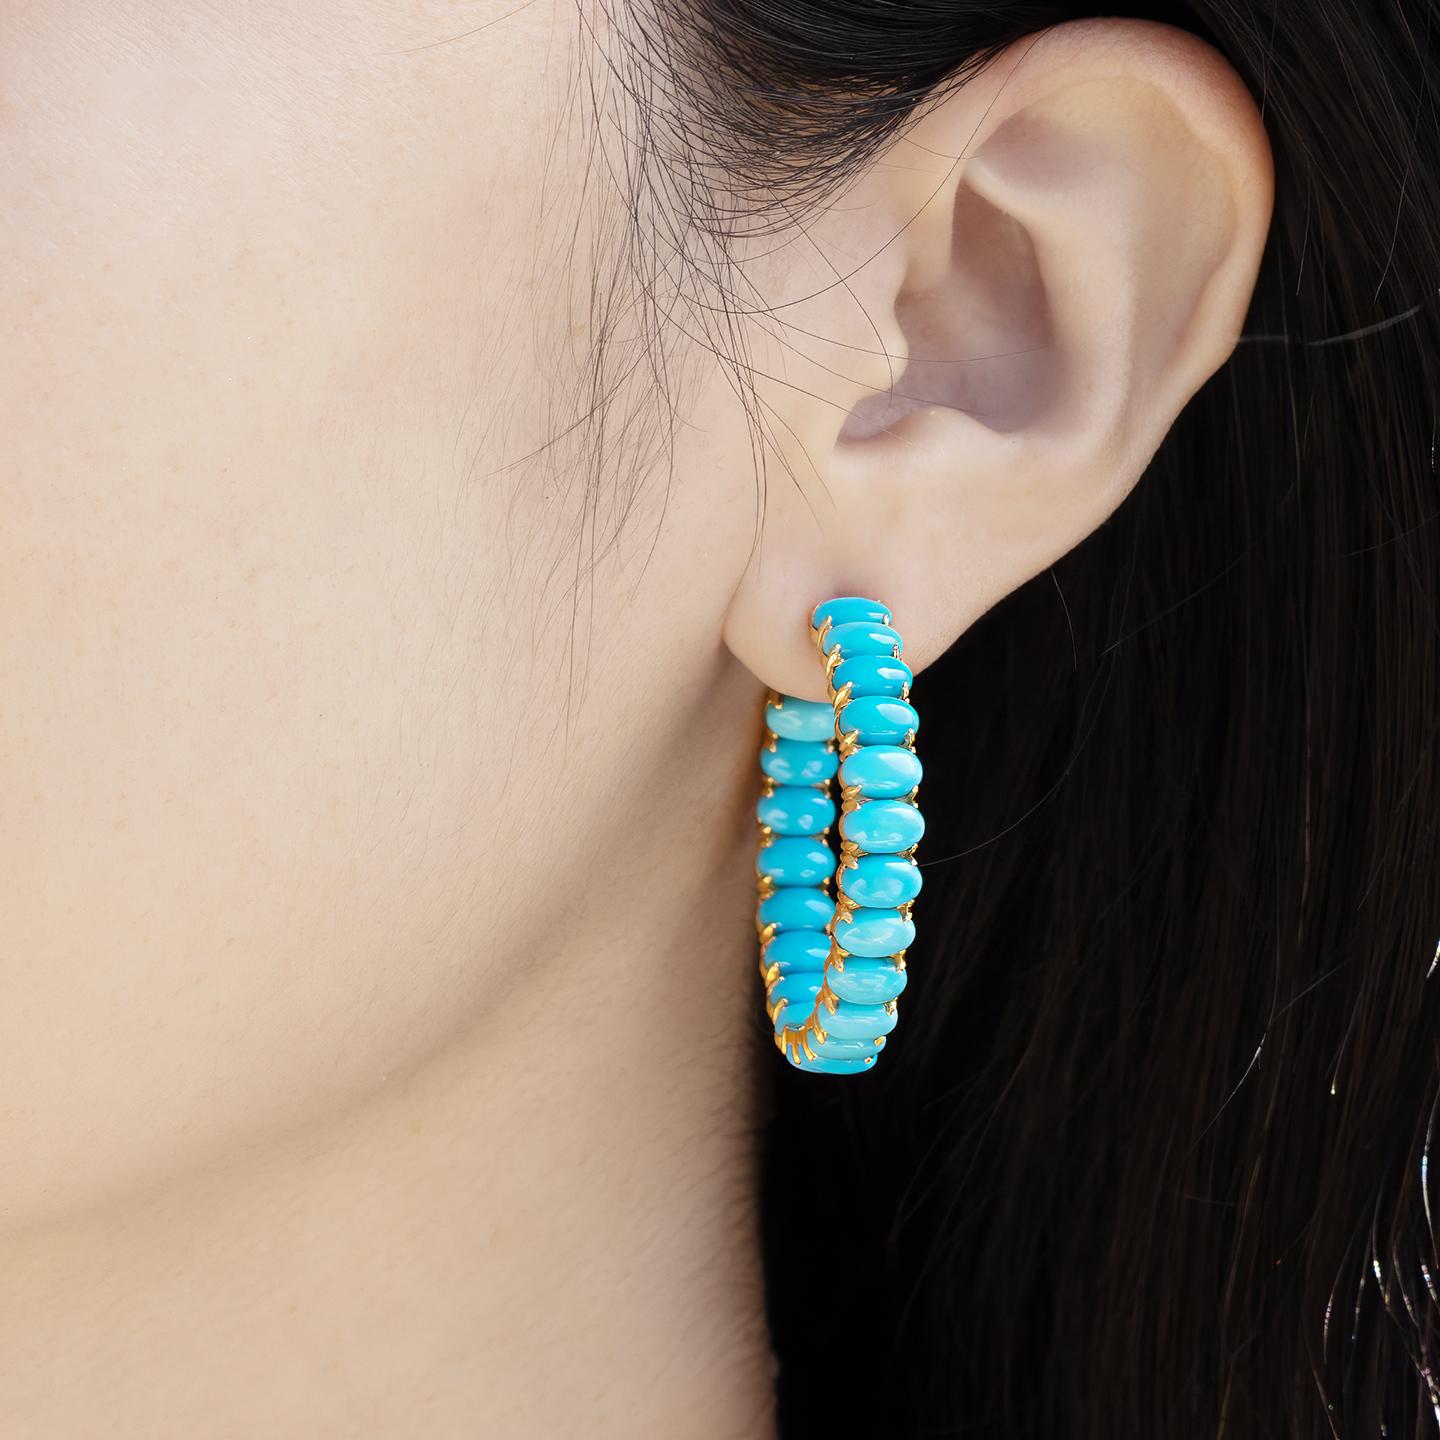 Nina Zhou's 17.76ctw Turquoise Inside-out Hoop Earrings in 14k yellow gold encapsulate vibrant elegance with a modern twist. Crafted meticulously, these stunning hoops showcase richly hued, 10-carat turquoise gemstones set both inside and outside,